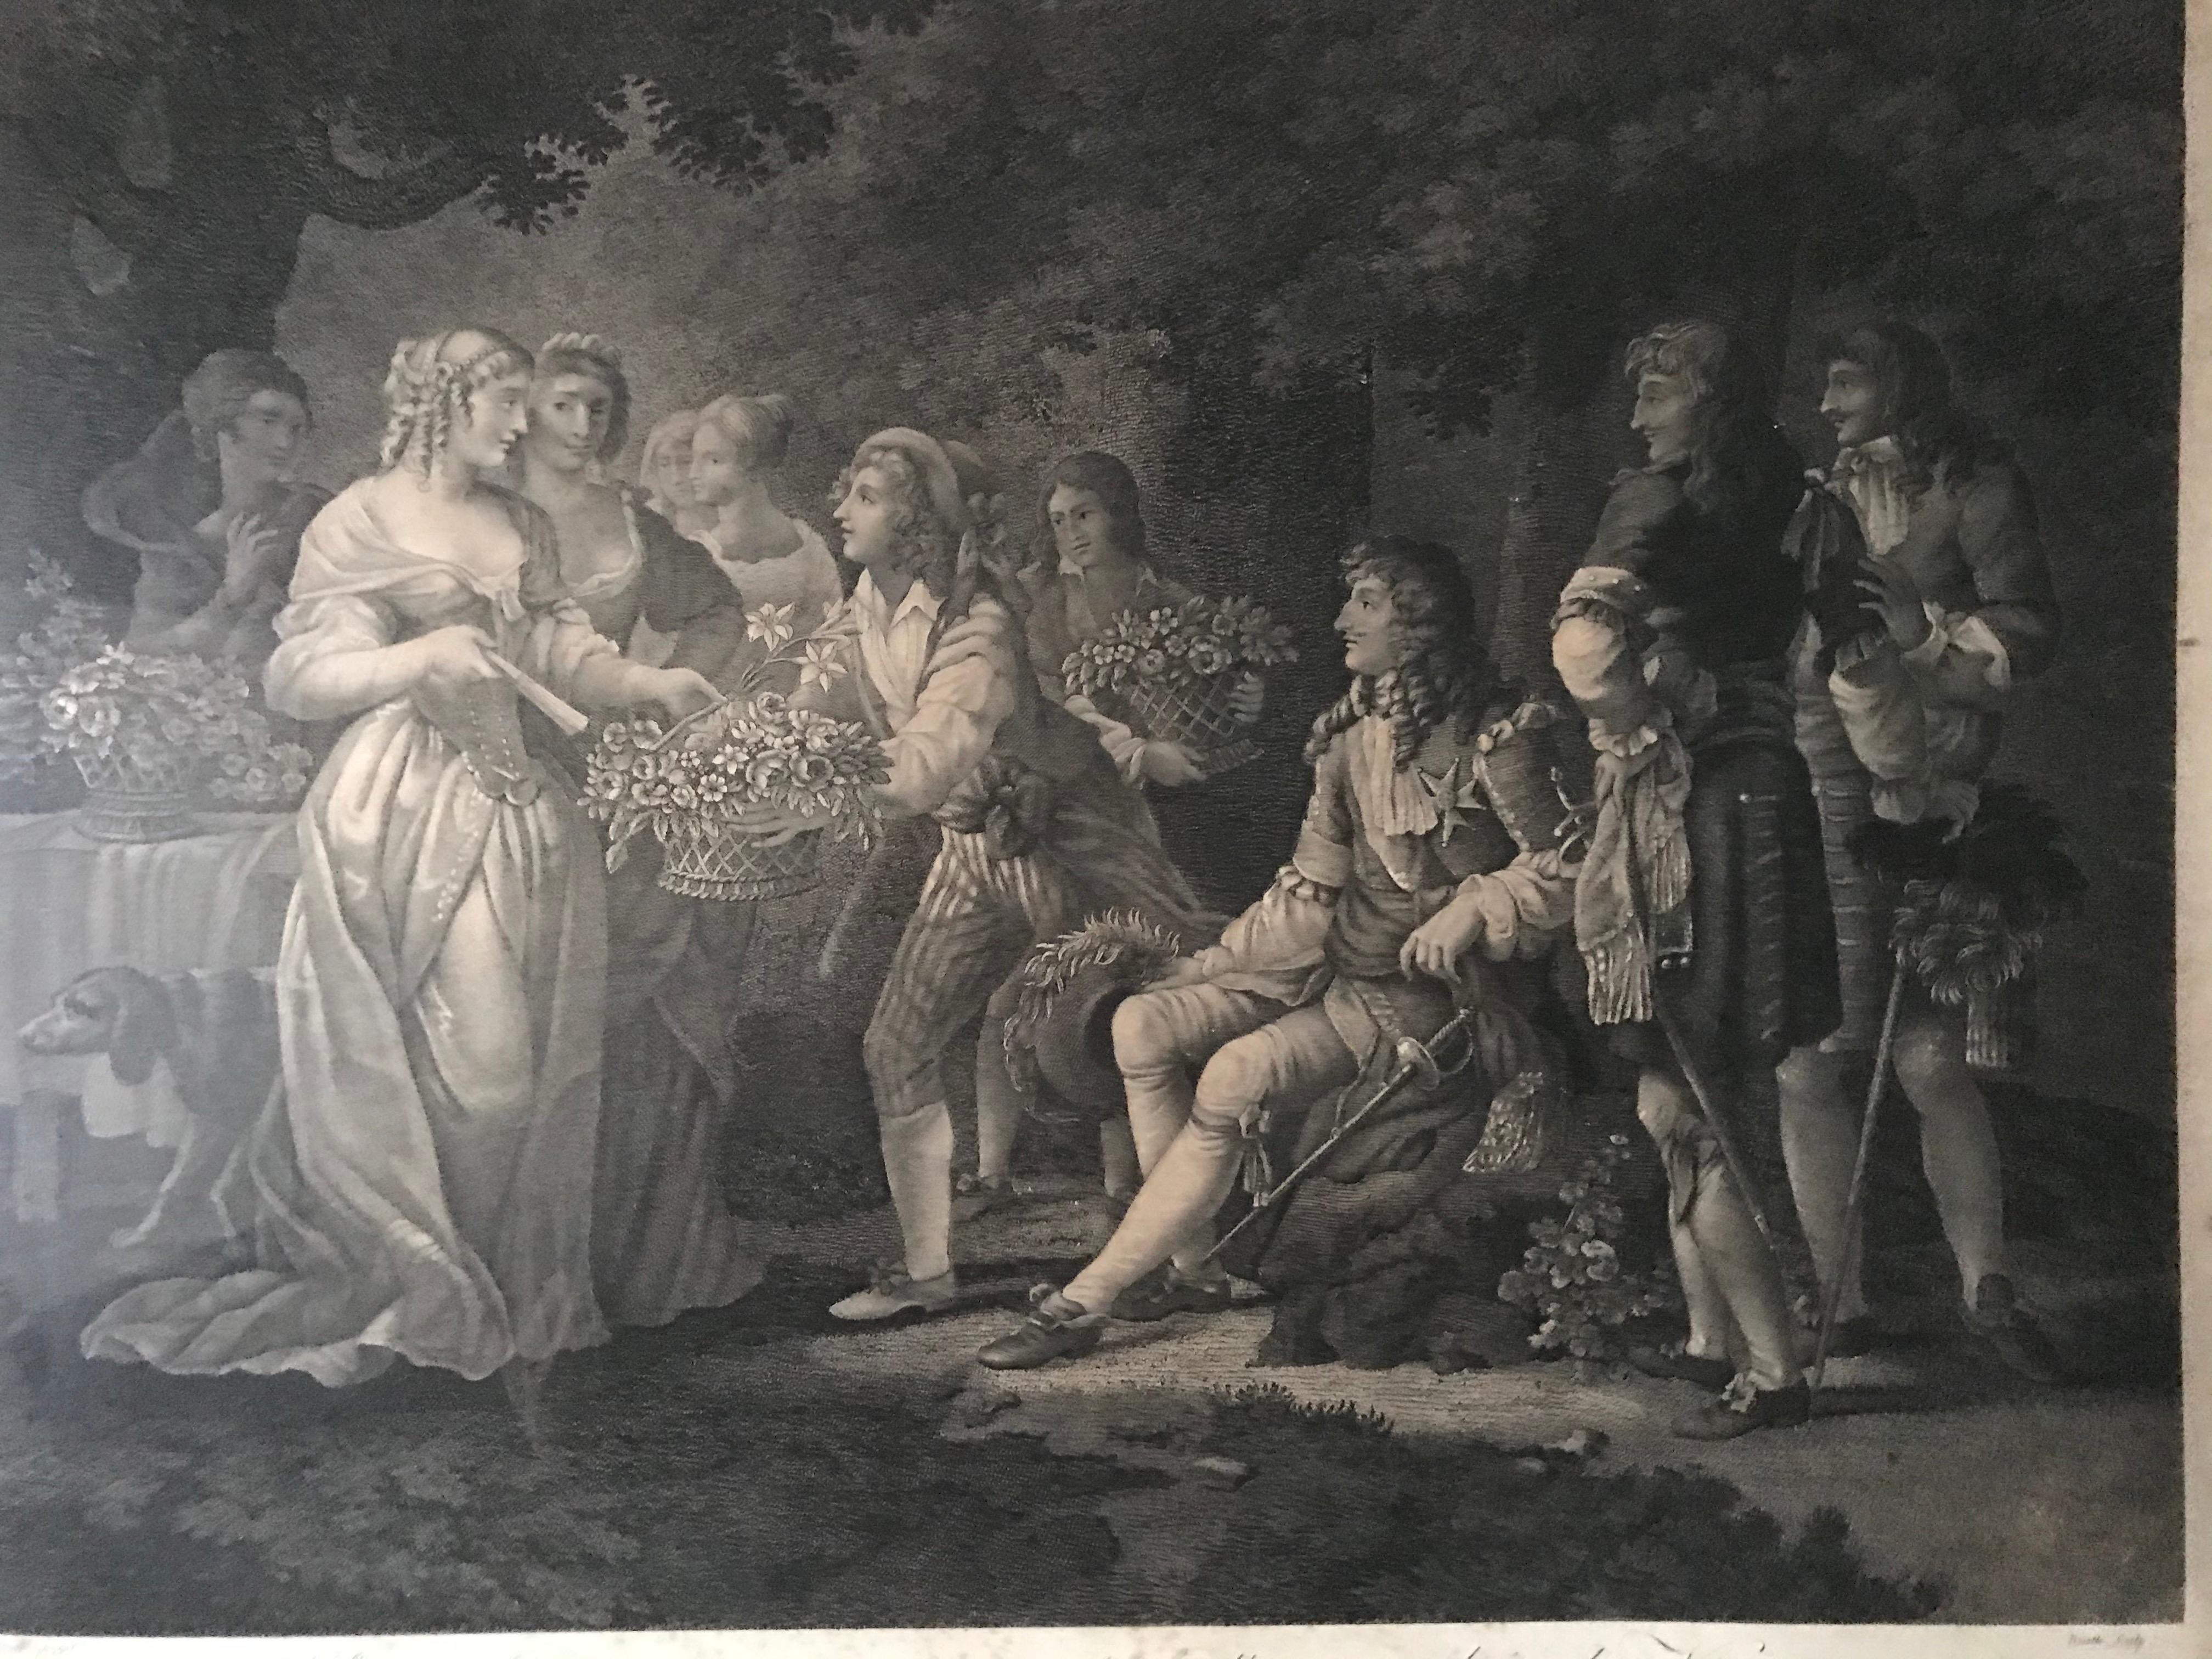 This charming engraving named Mademoiselle de La Vallières under a tent in the Bois de Vincennes was made by Louis Charles Ruotte, after the work of Jean Frédéric Schall. This engraving belongs to a series of 6 engravings dealing with the meeting